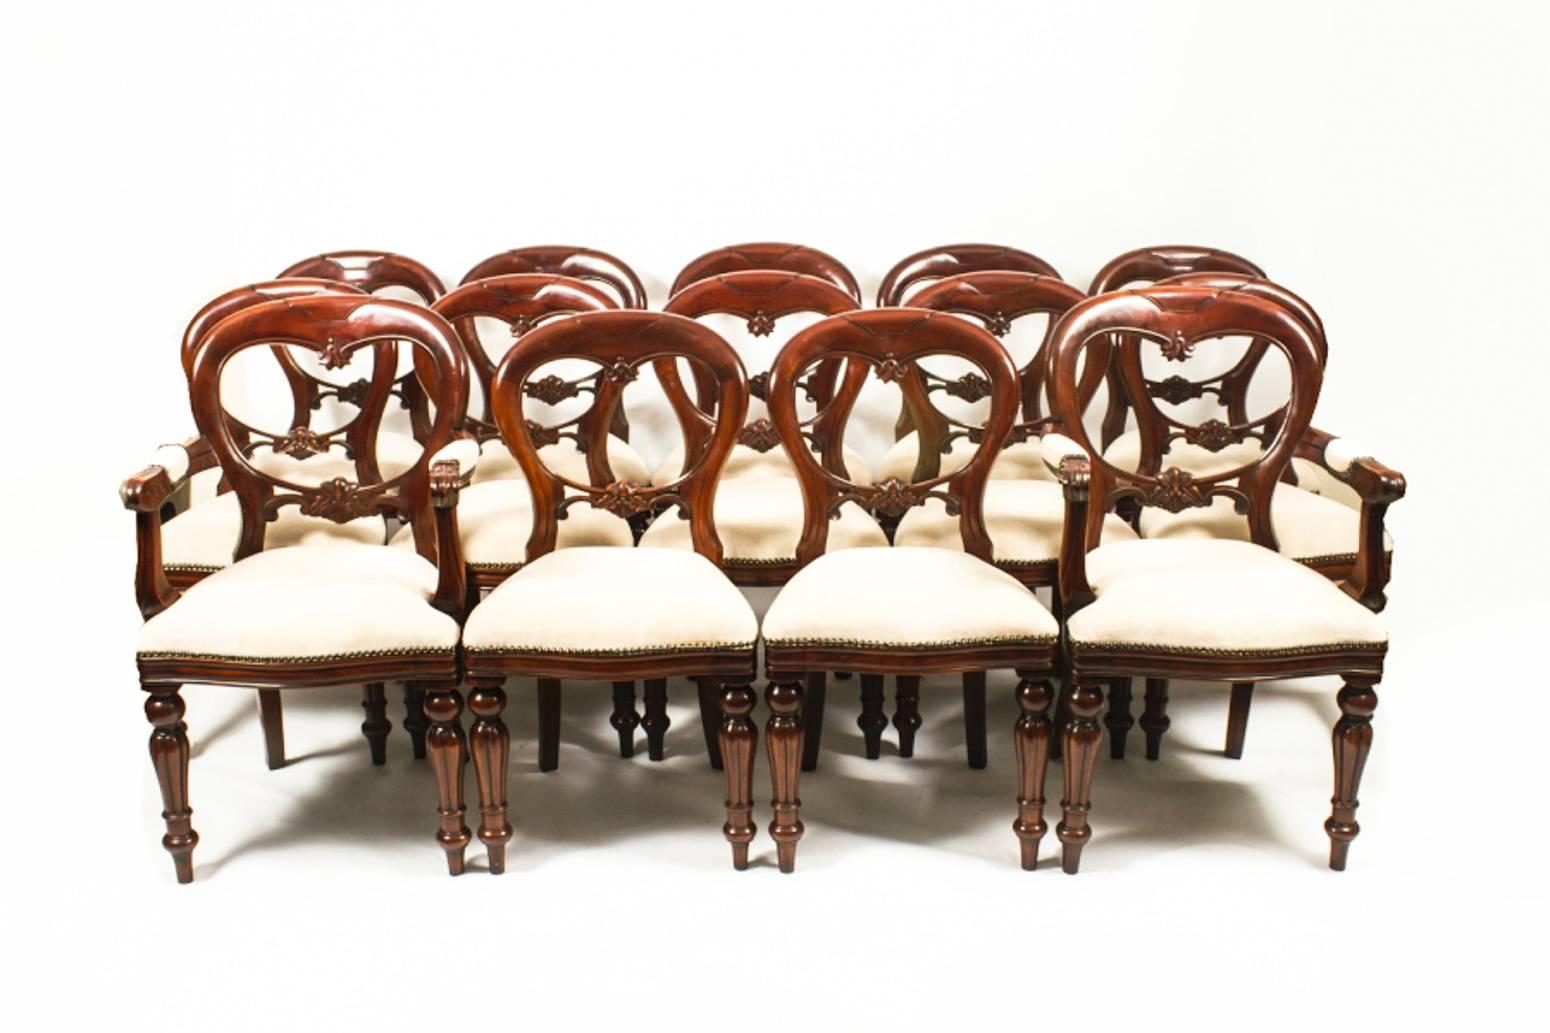 English Antique Extending Dining Table 14 Chairs, circa 1880